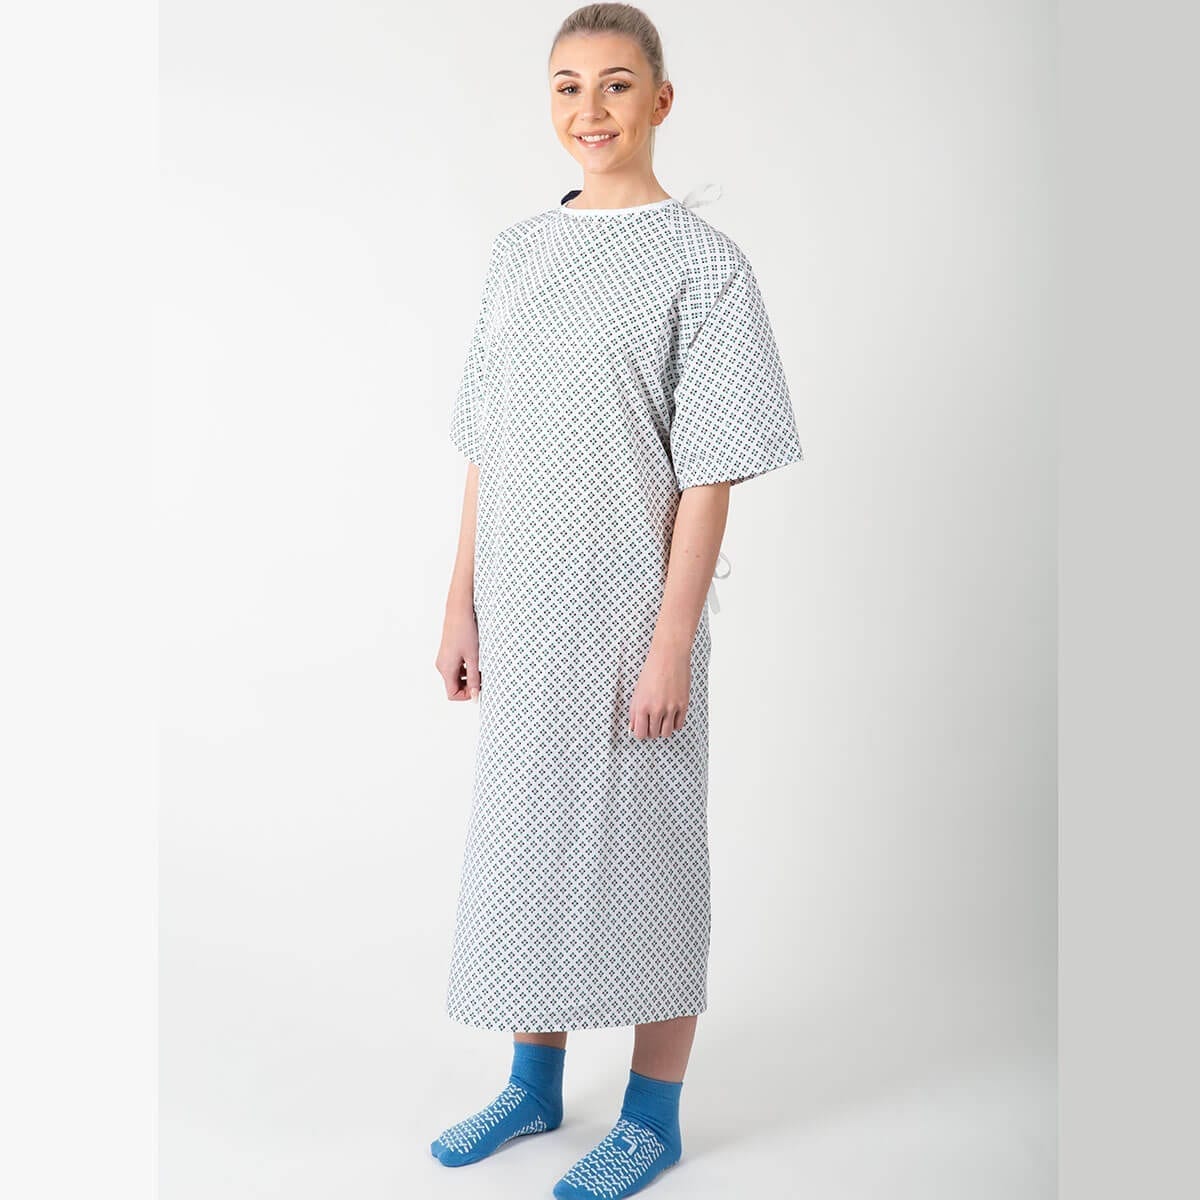 Hospital lapover gown - front view